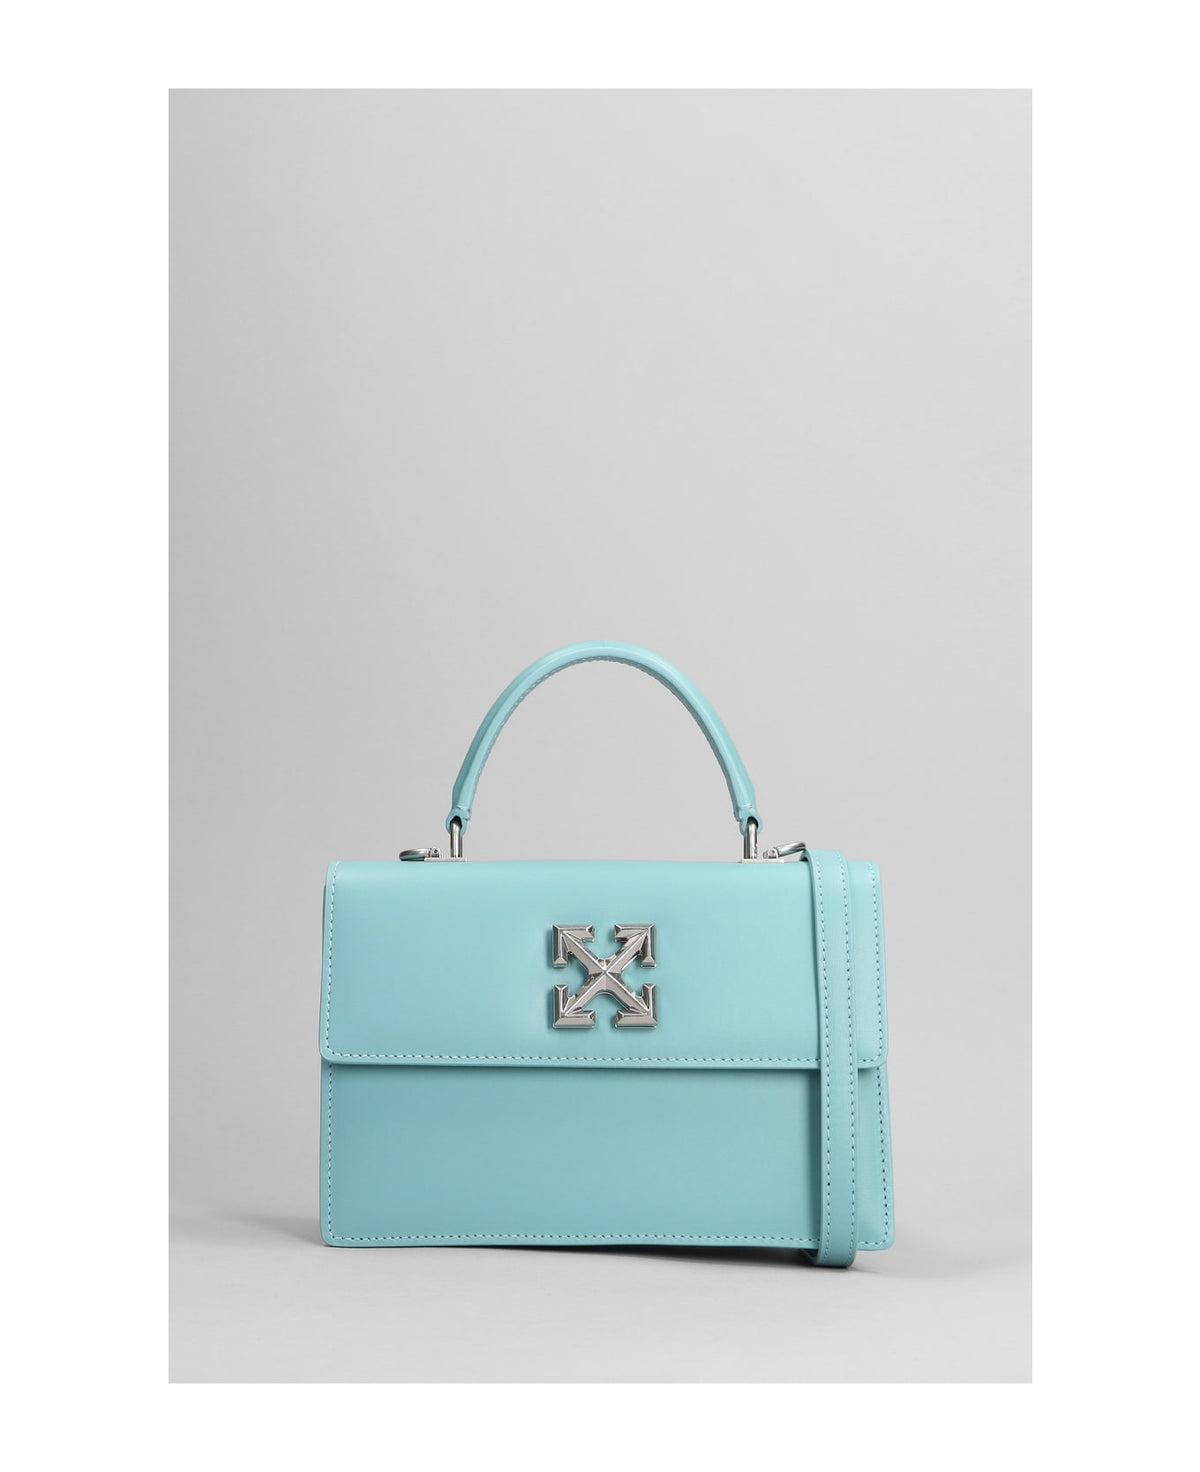 Hand Bag In Blue Leather